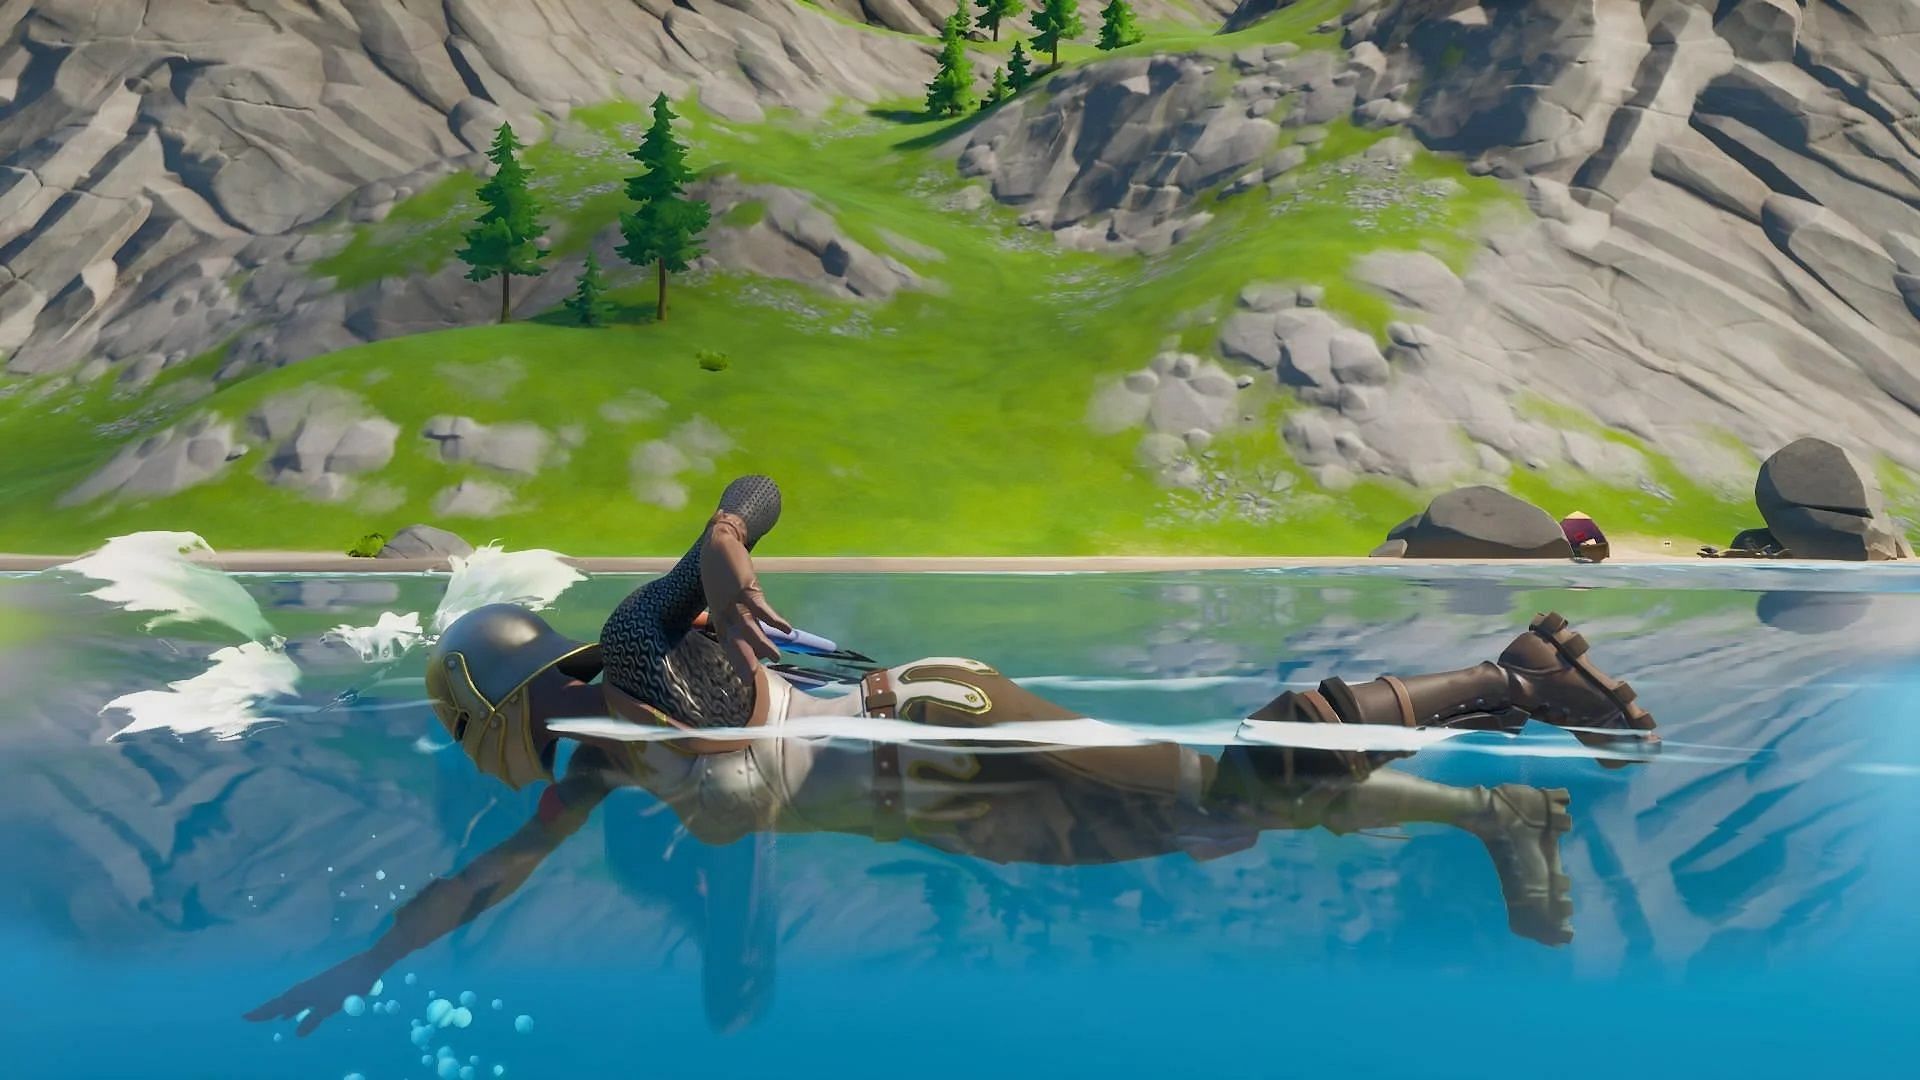 Fortnite Summer challenges are out and one of them requires players to damage enemies while swimming (Image via Epic Games)